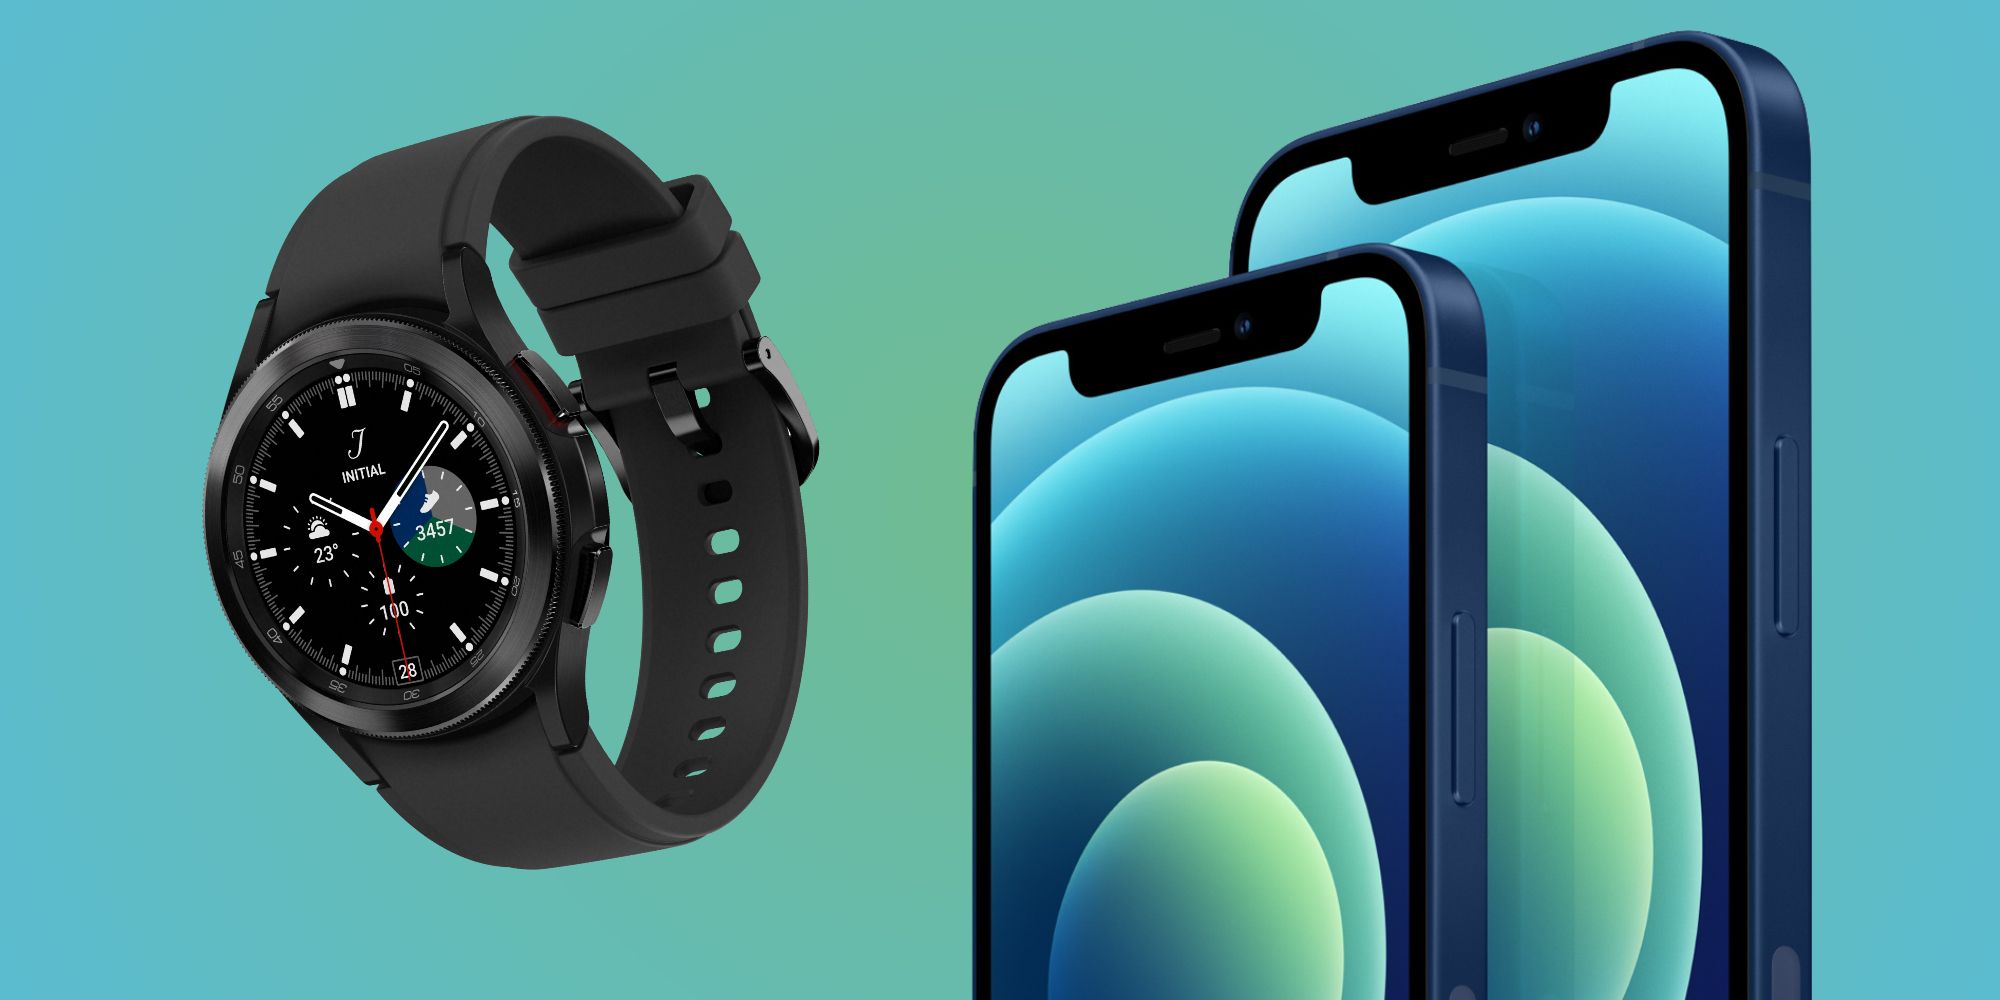 Samsung Smartwatches for Android & iOS, Samsung US